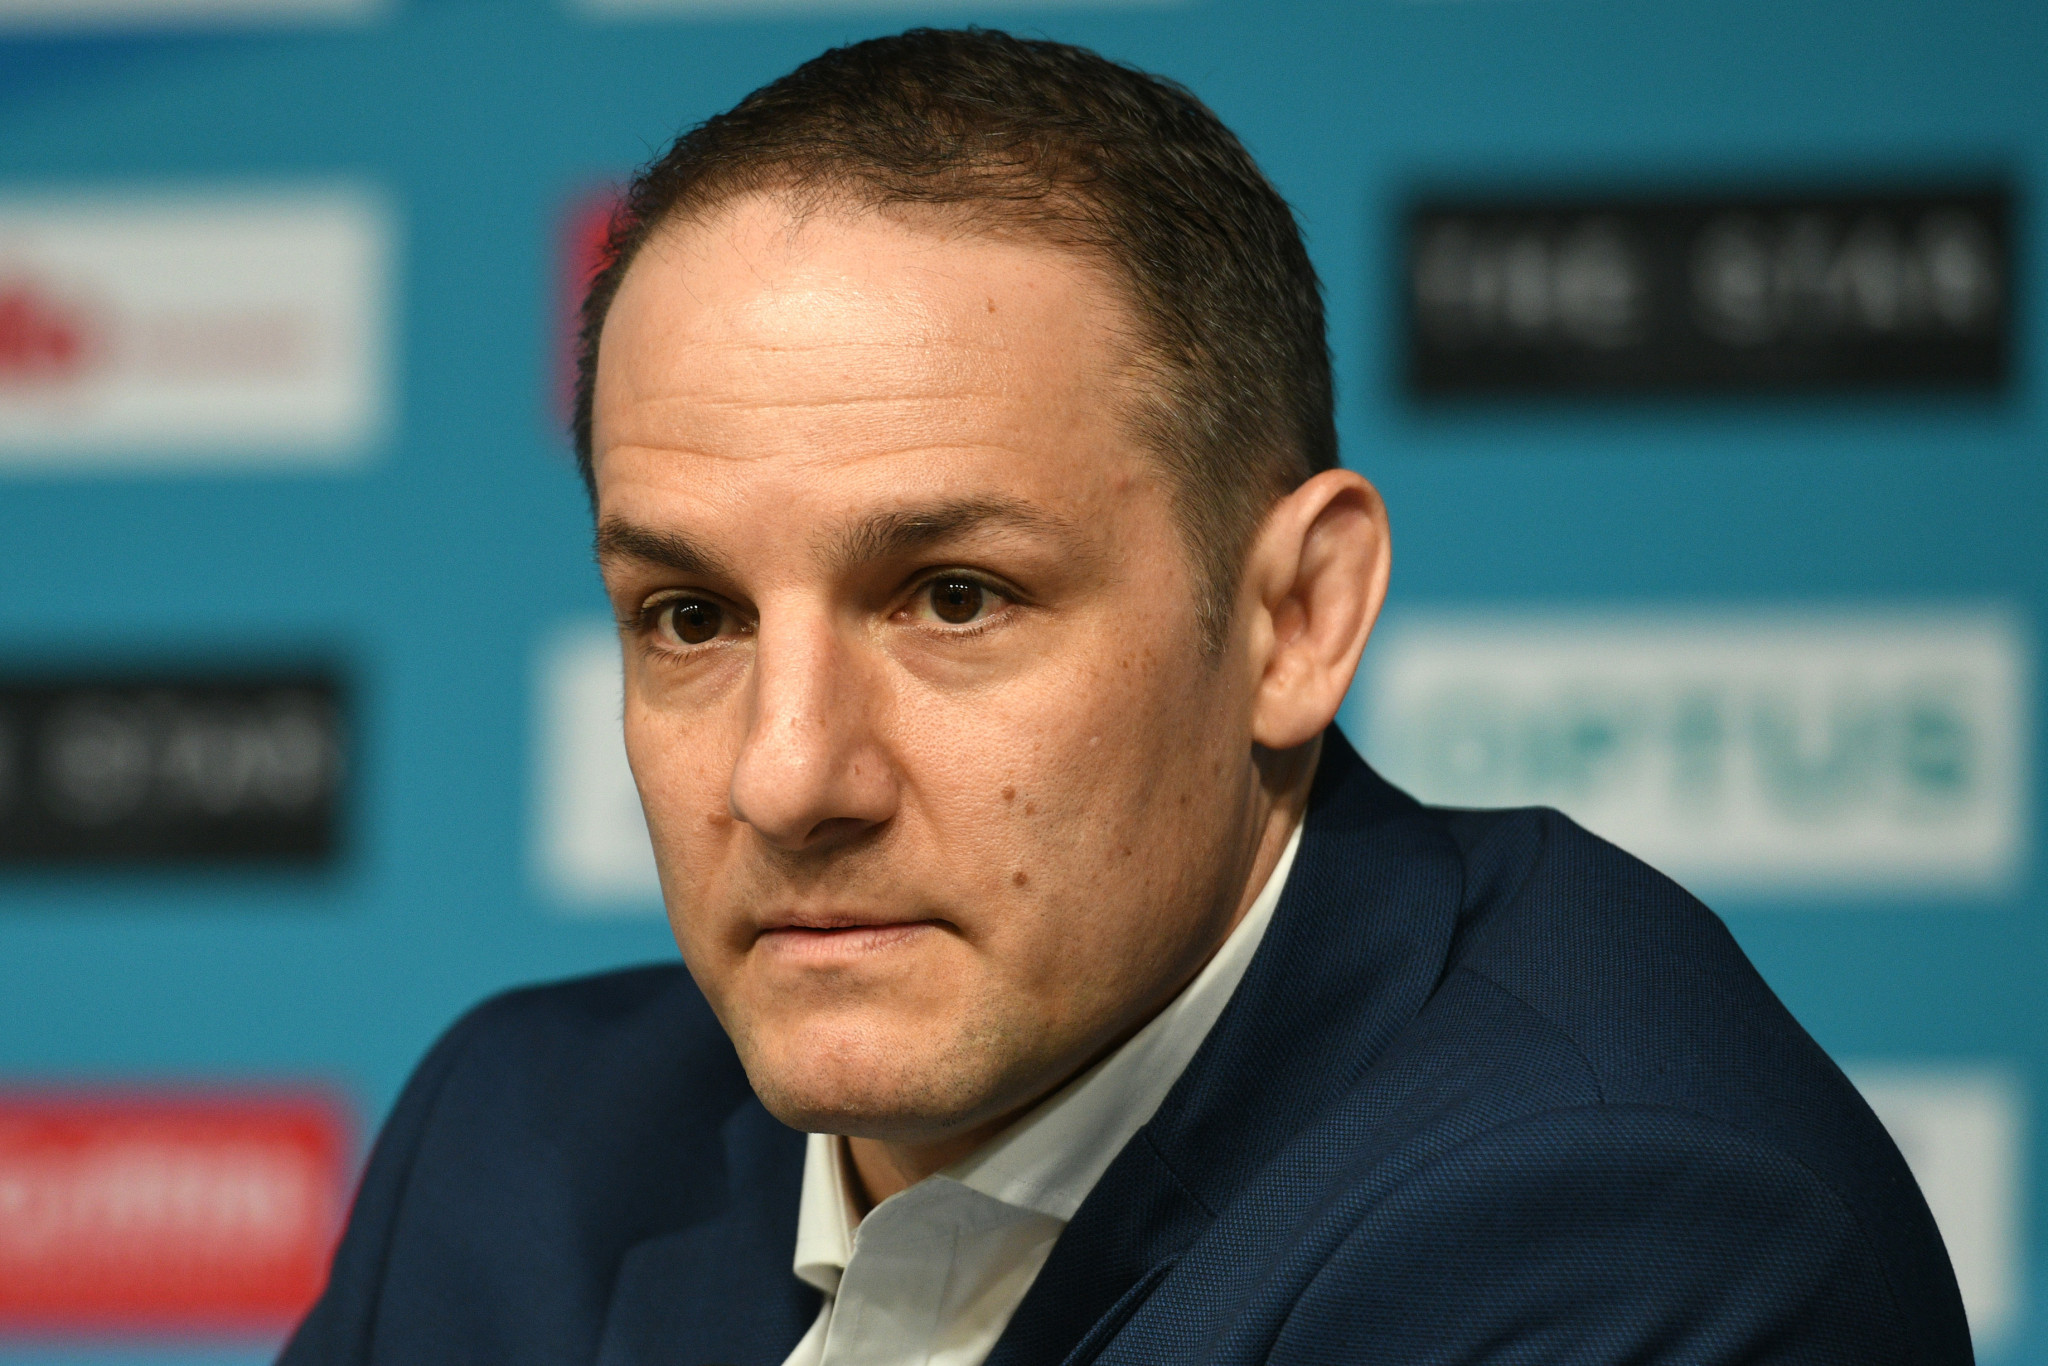 Grevemberg stepping down as Commonwealth Games Federation chief executive 